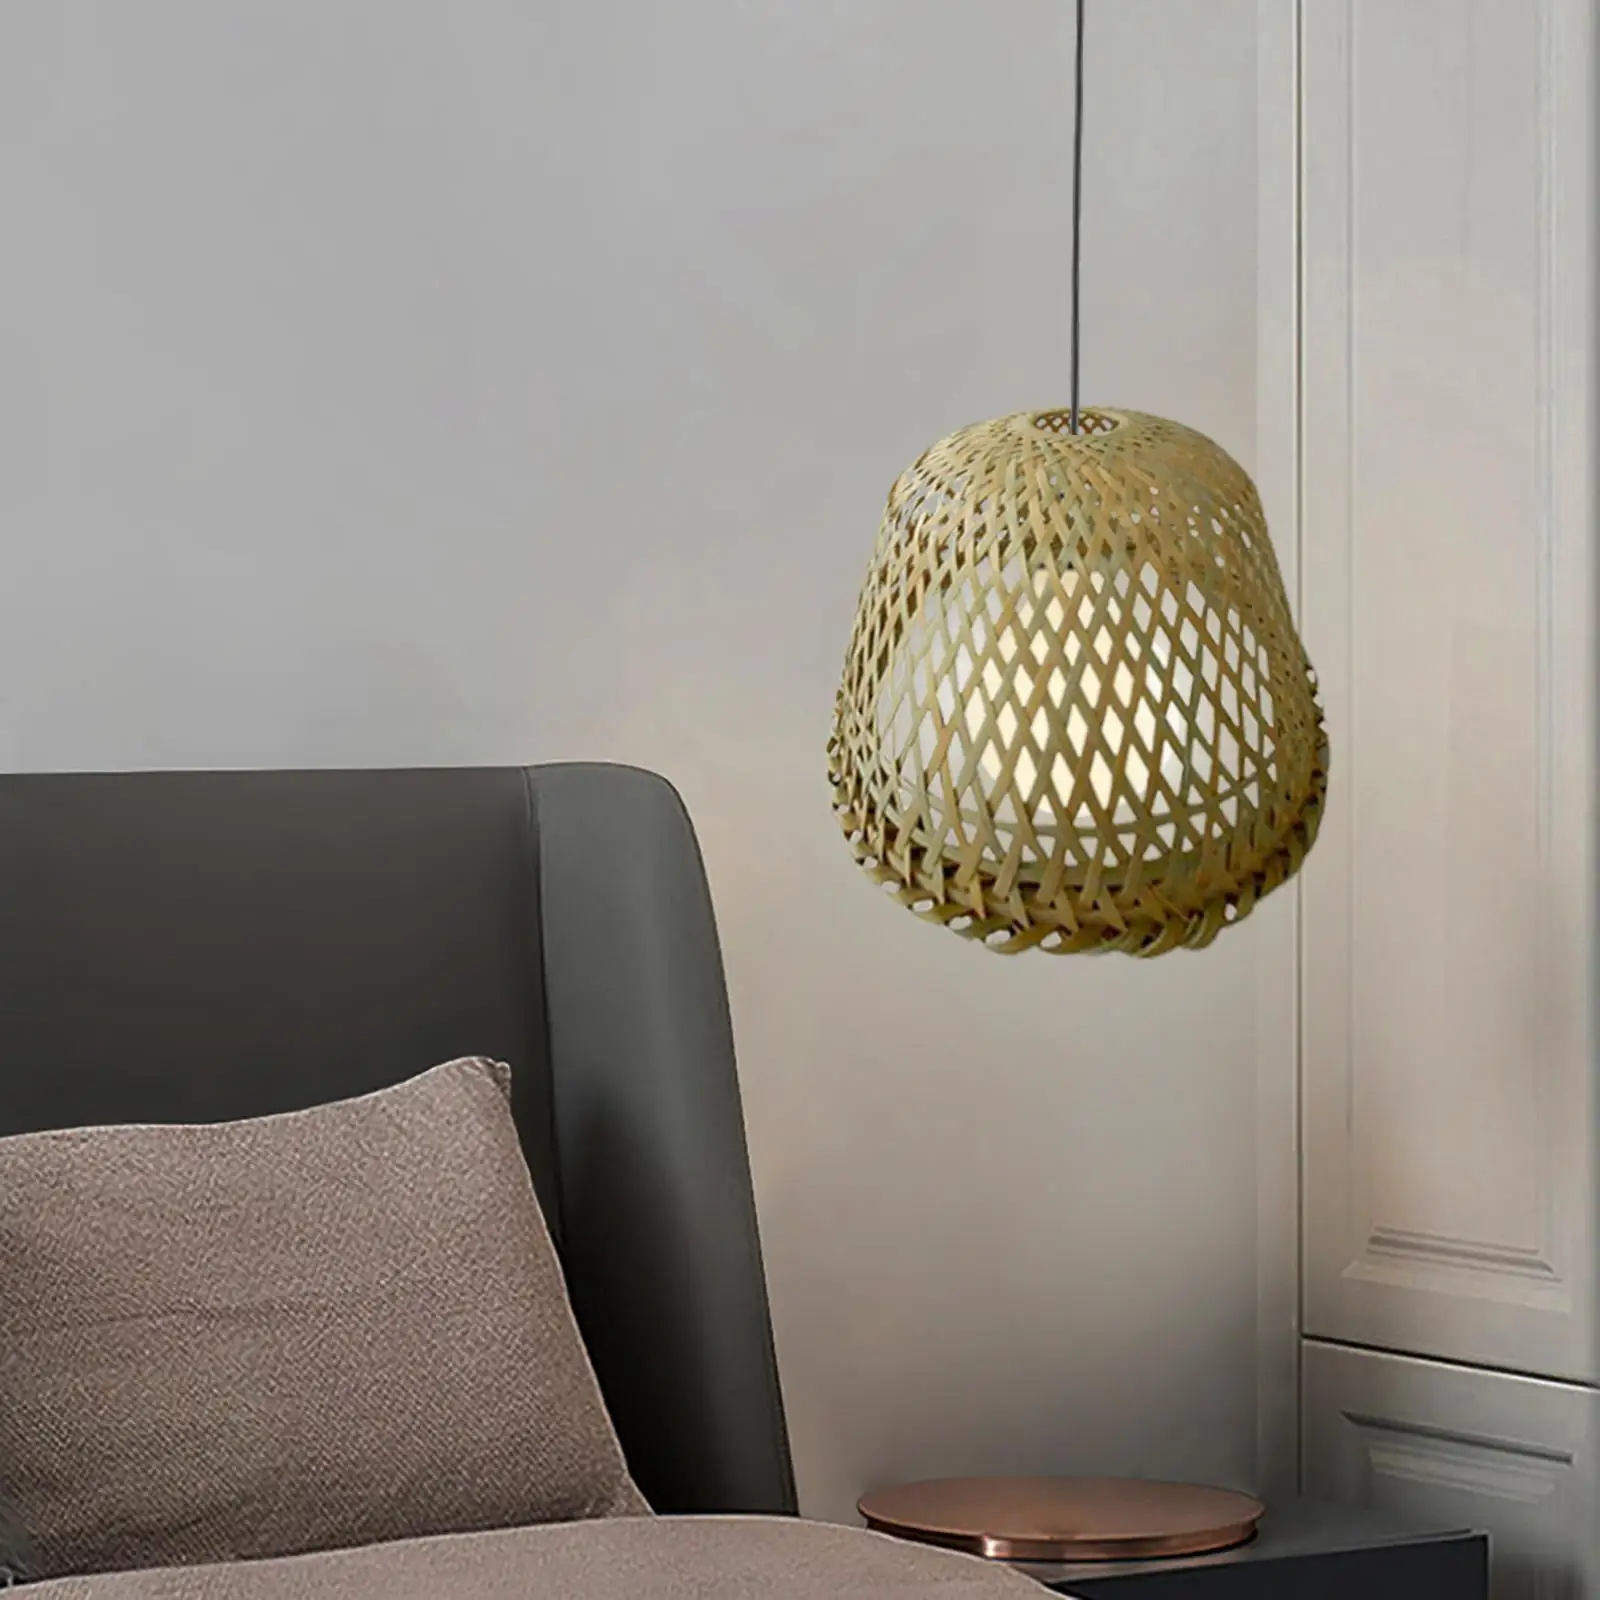 Bamboo Lamp Shade Hand Weaved Light Shade Fitting Hanging Pendant Lamp Cover Chandelier Lampshade for Hotel Cafe Home Decorative